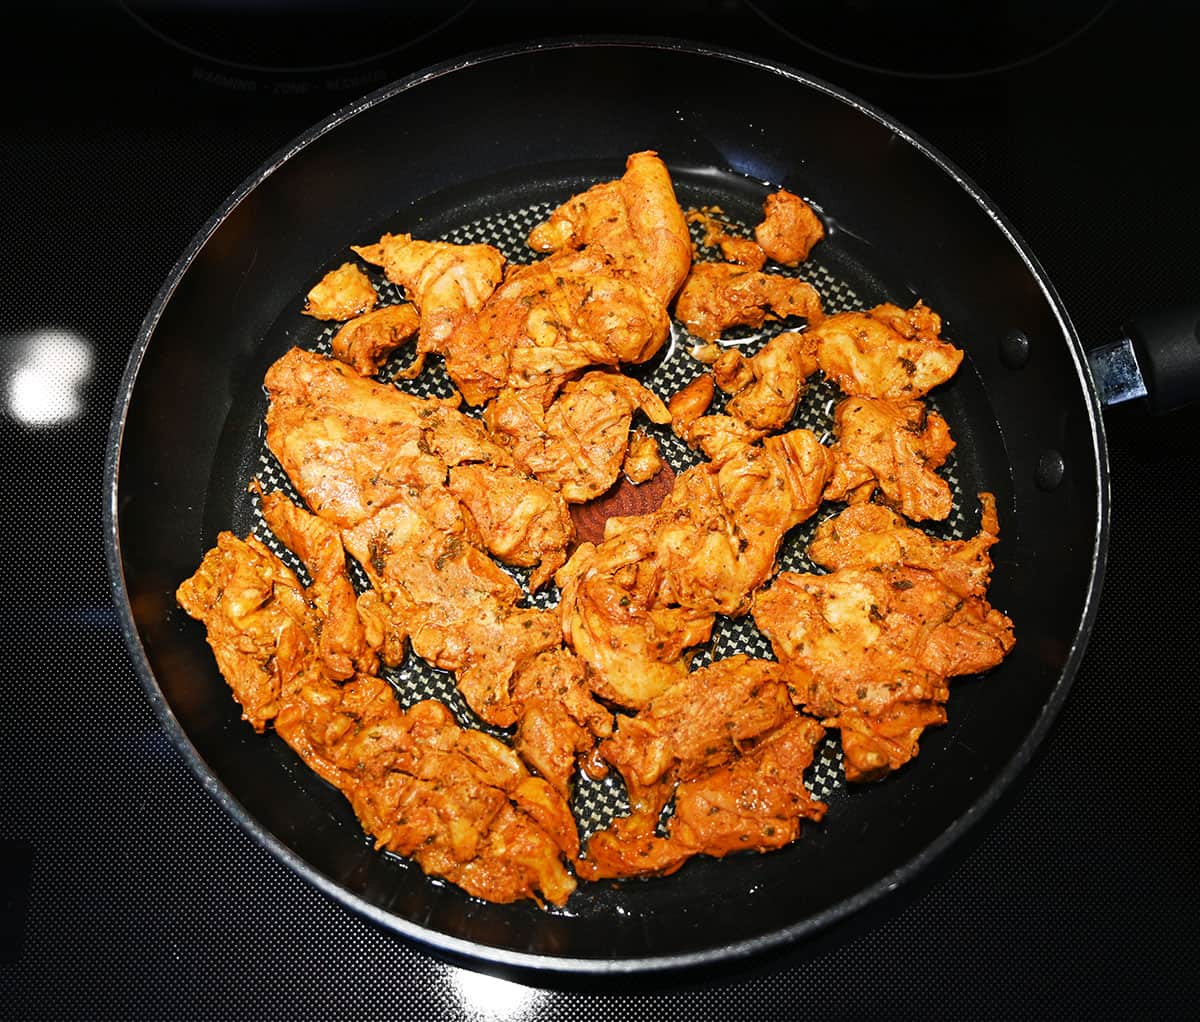 Image of the tandoori chicken being cooked in a frying pan.